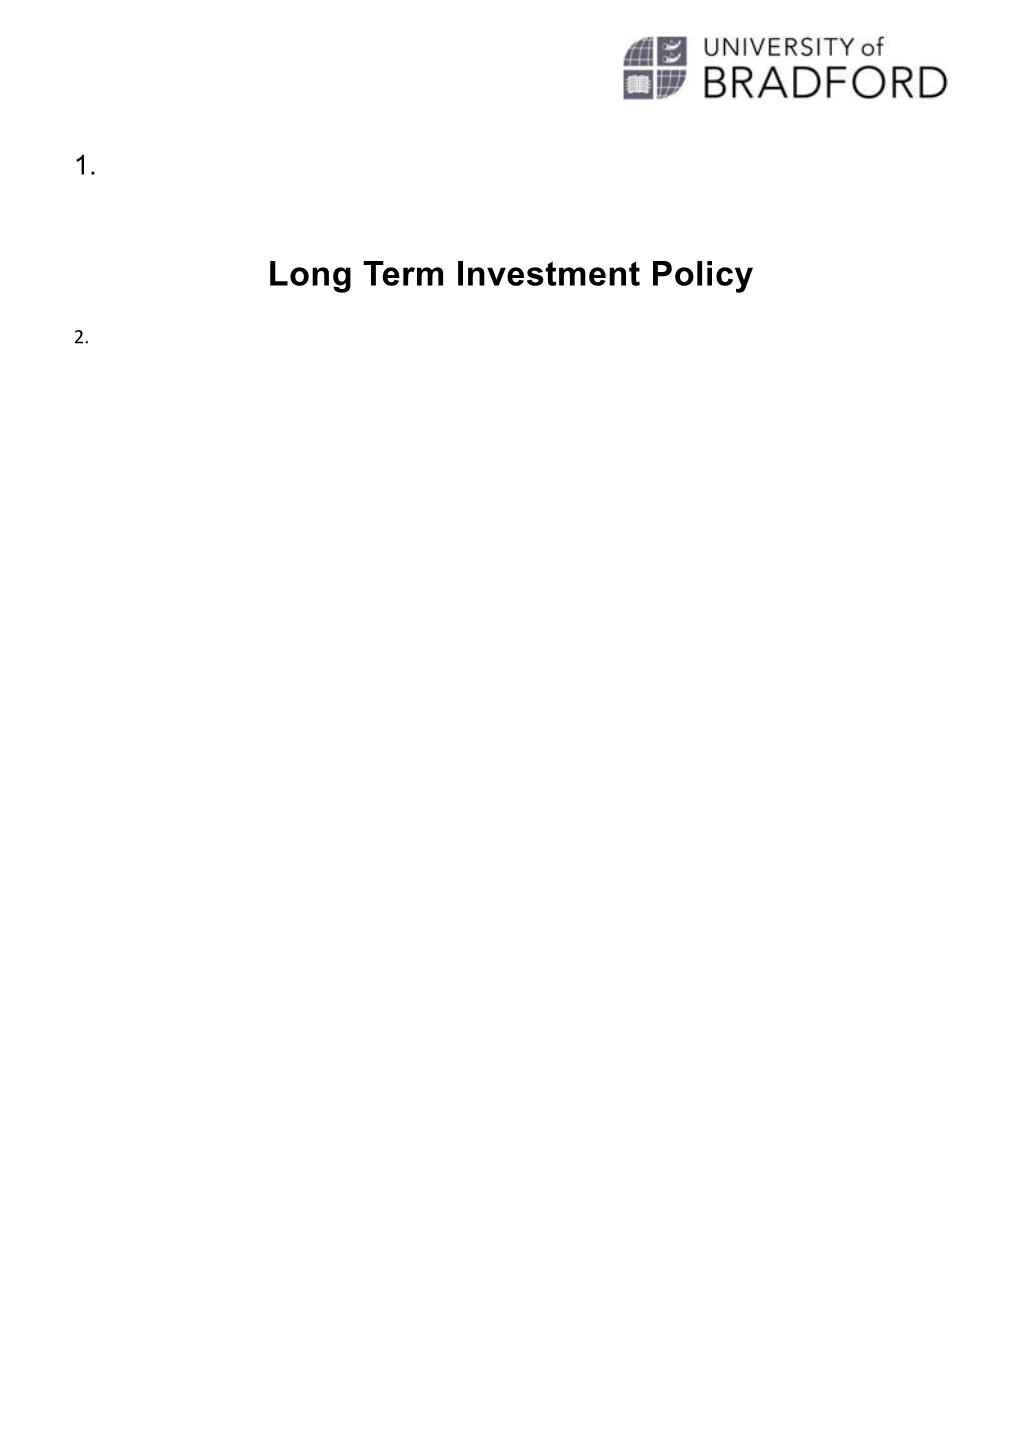 Long Term Investment Policy